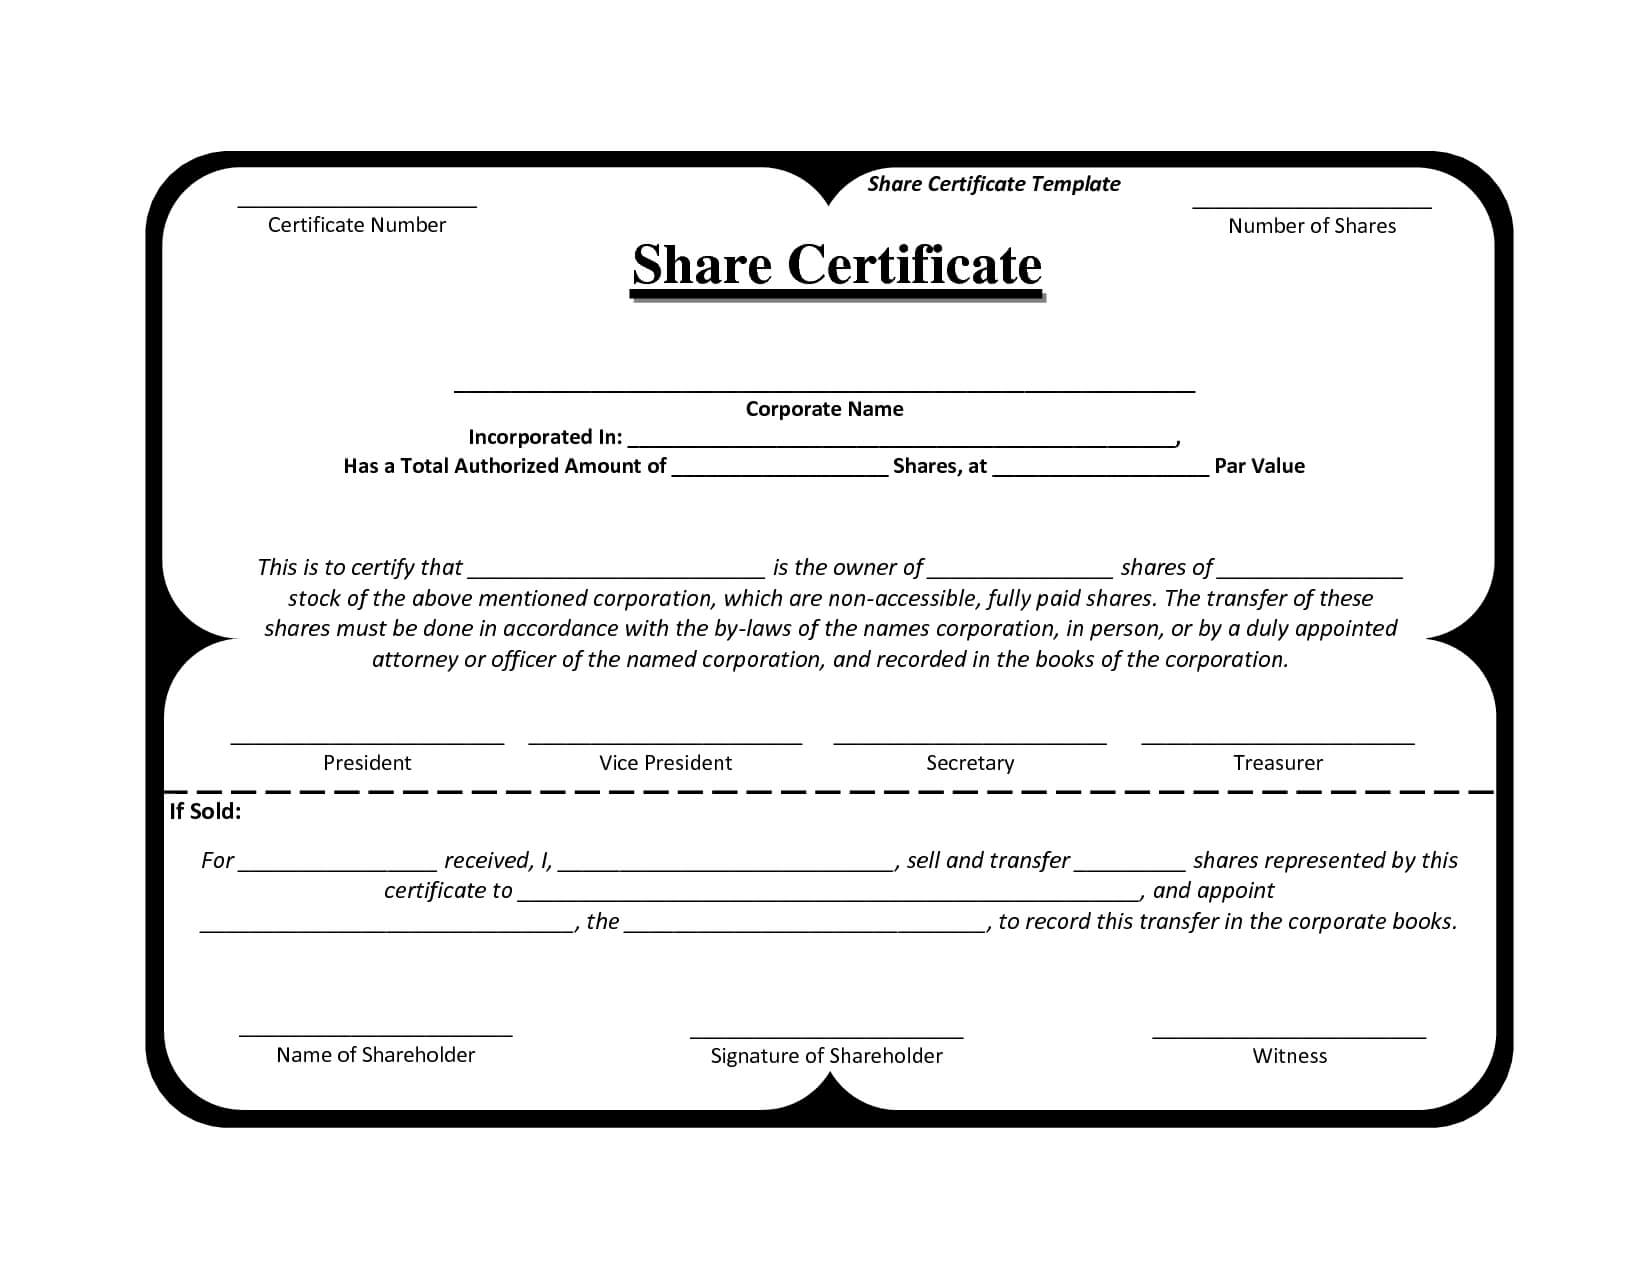 Template Share Certificate Rbscqi9V | Share Certificate Within Template For Share Certificate